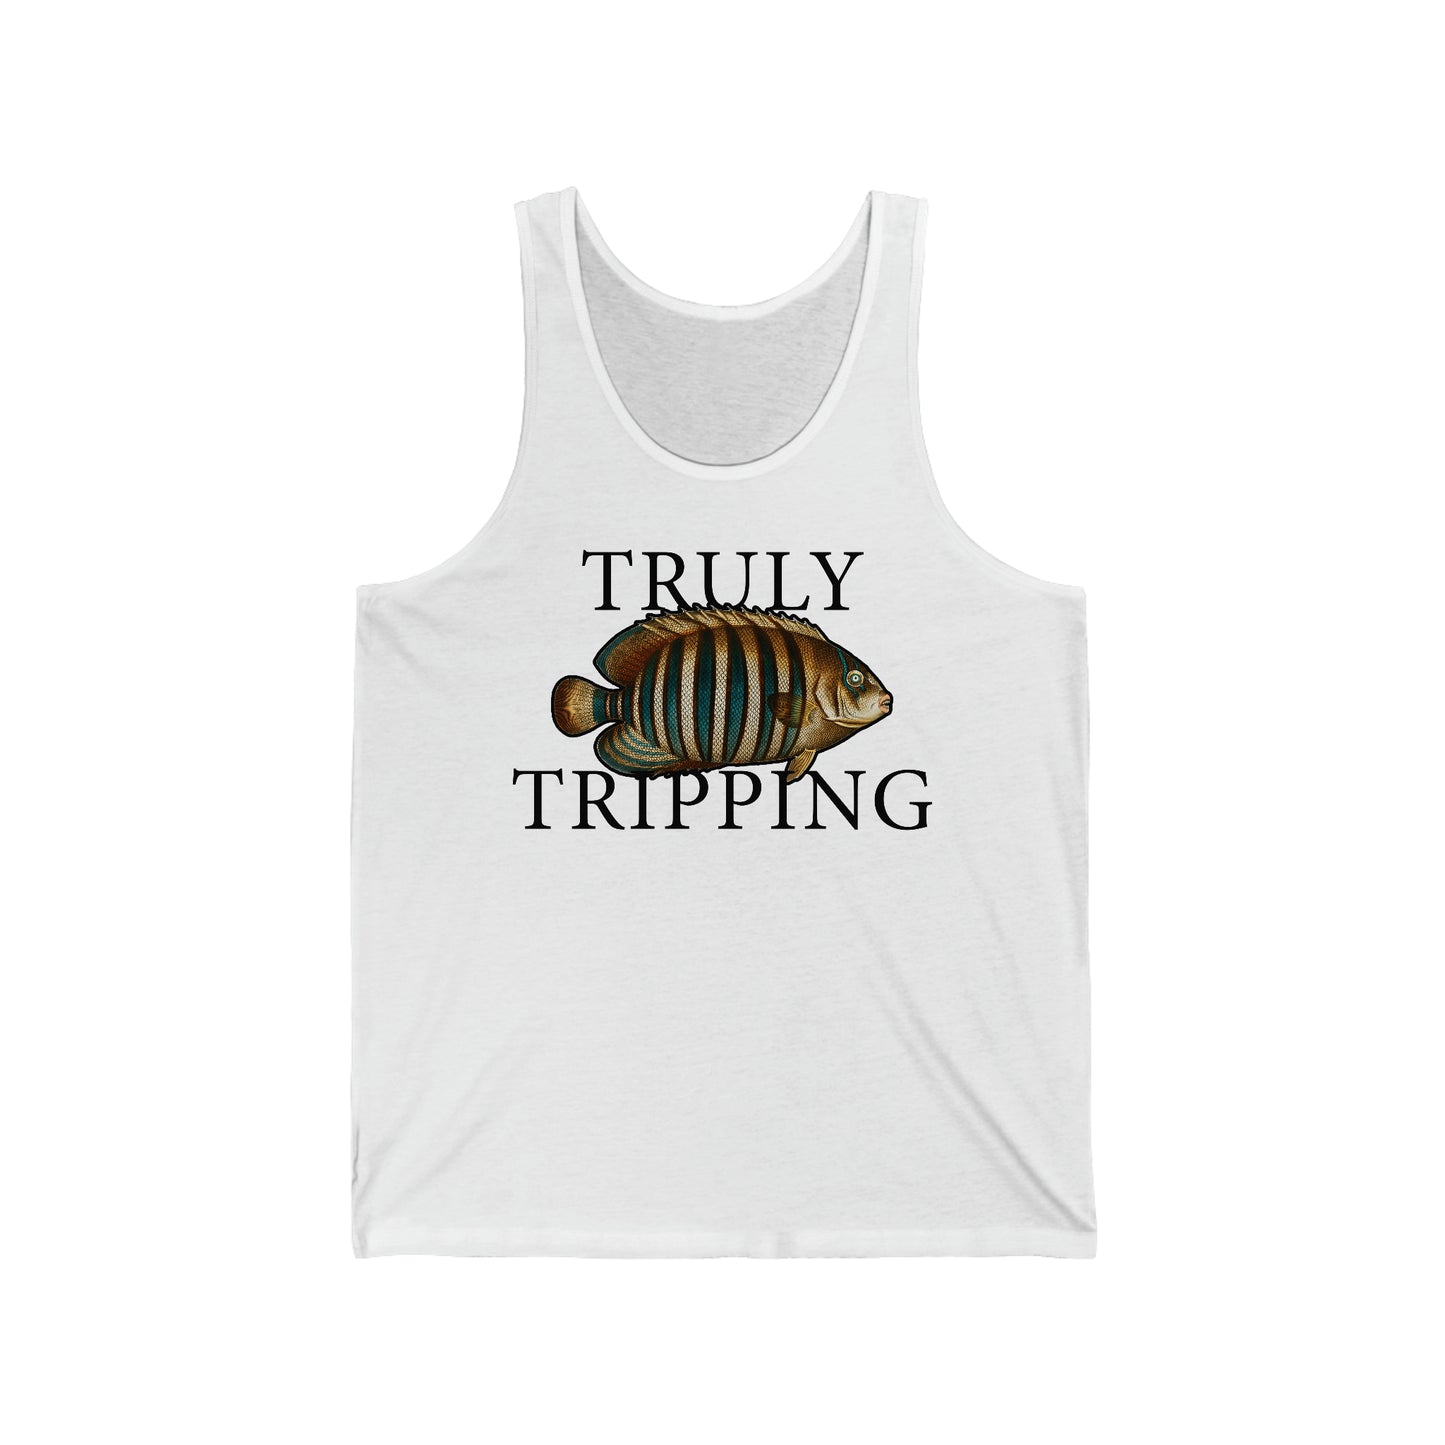 Truly Tripping - Tank Edition